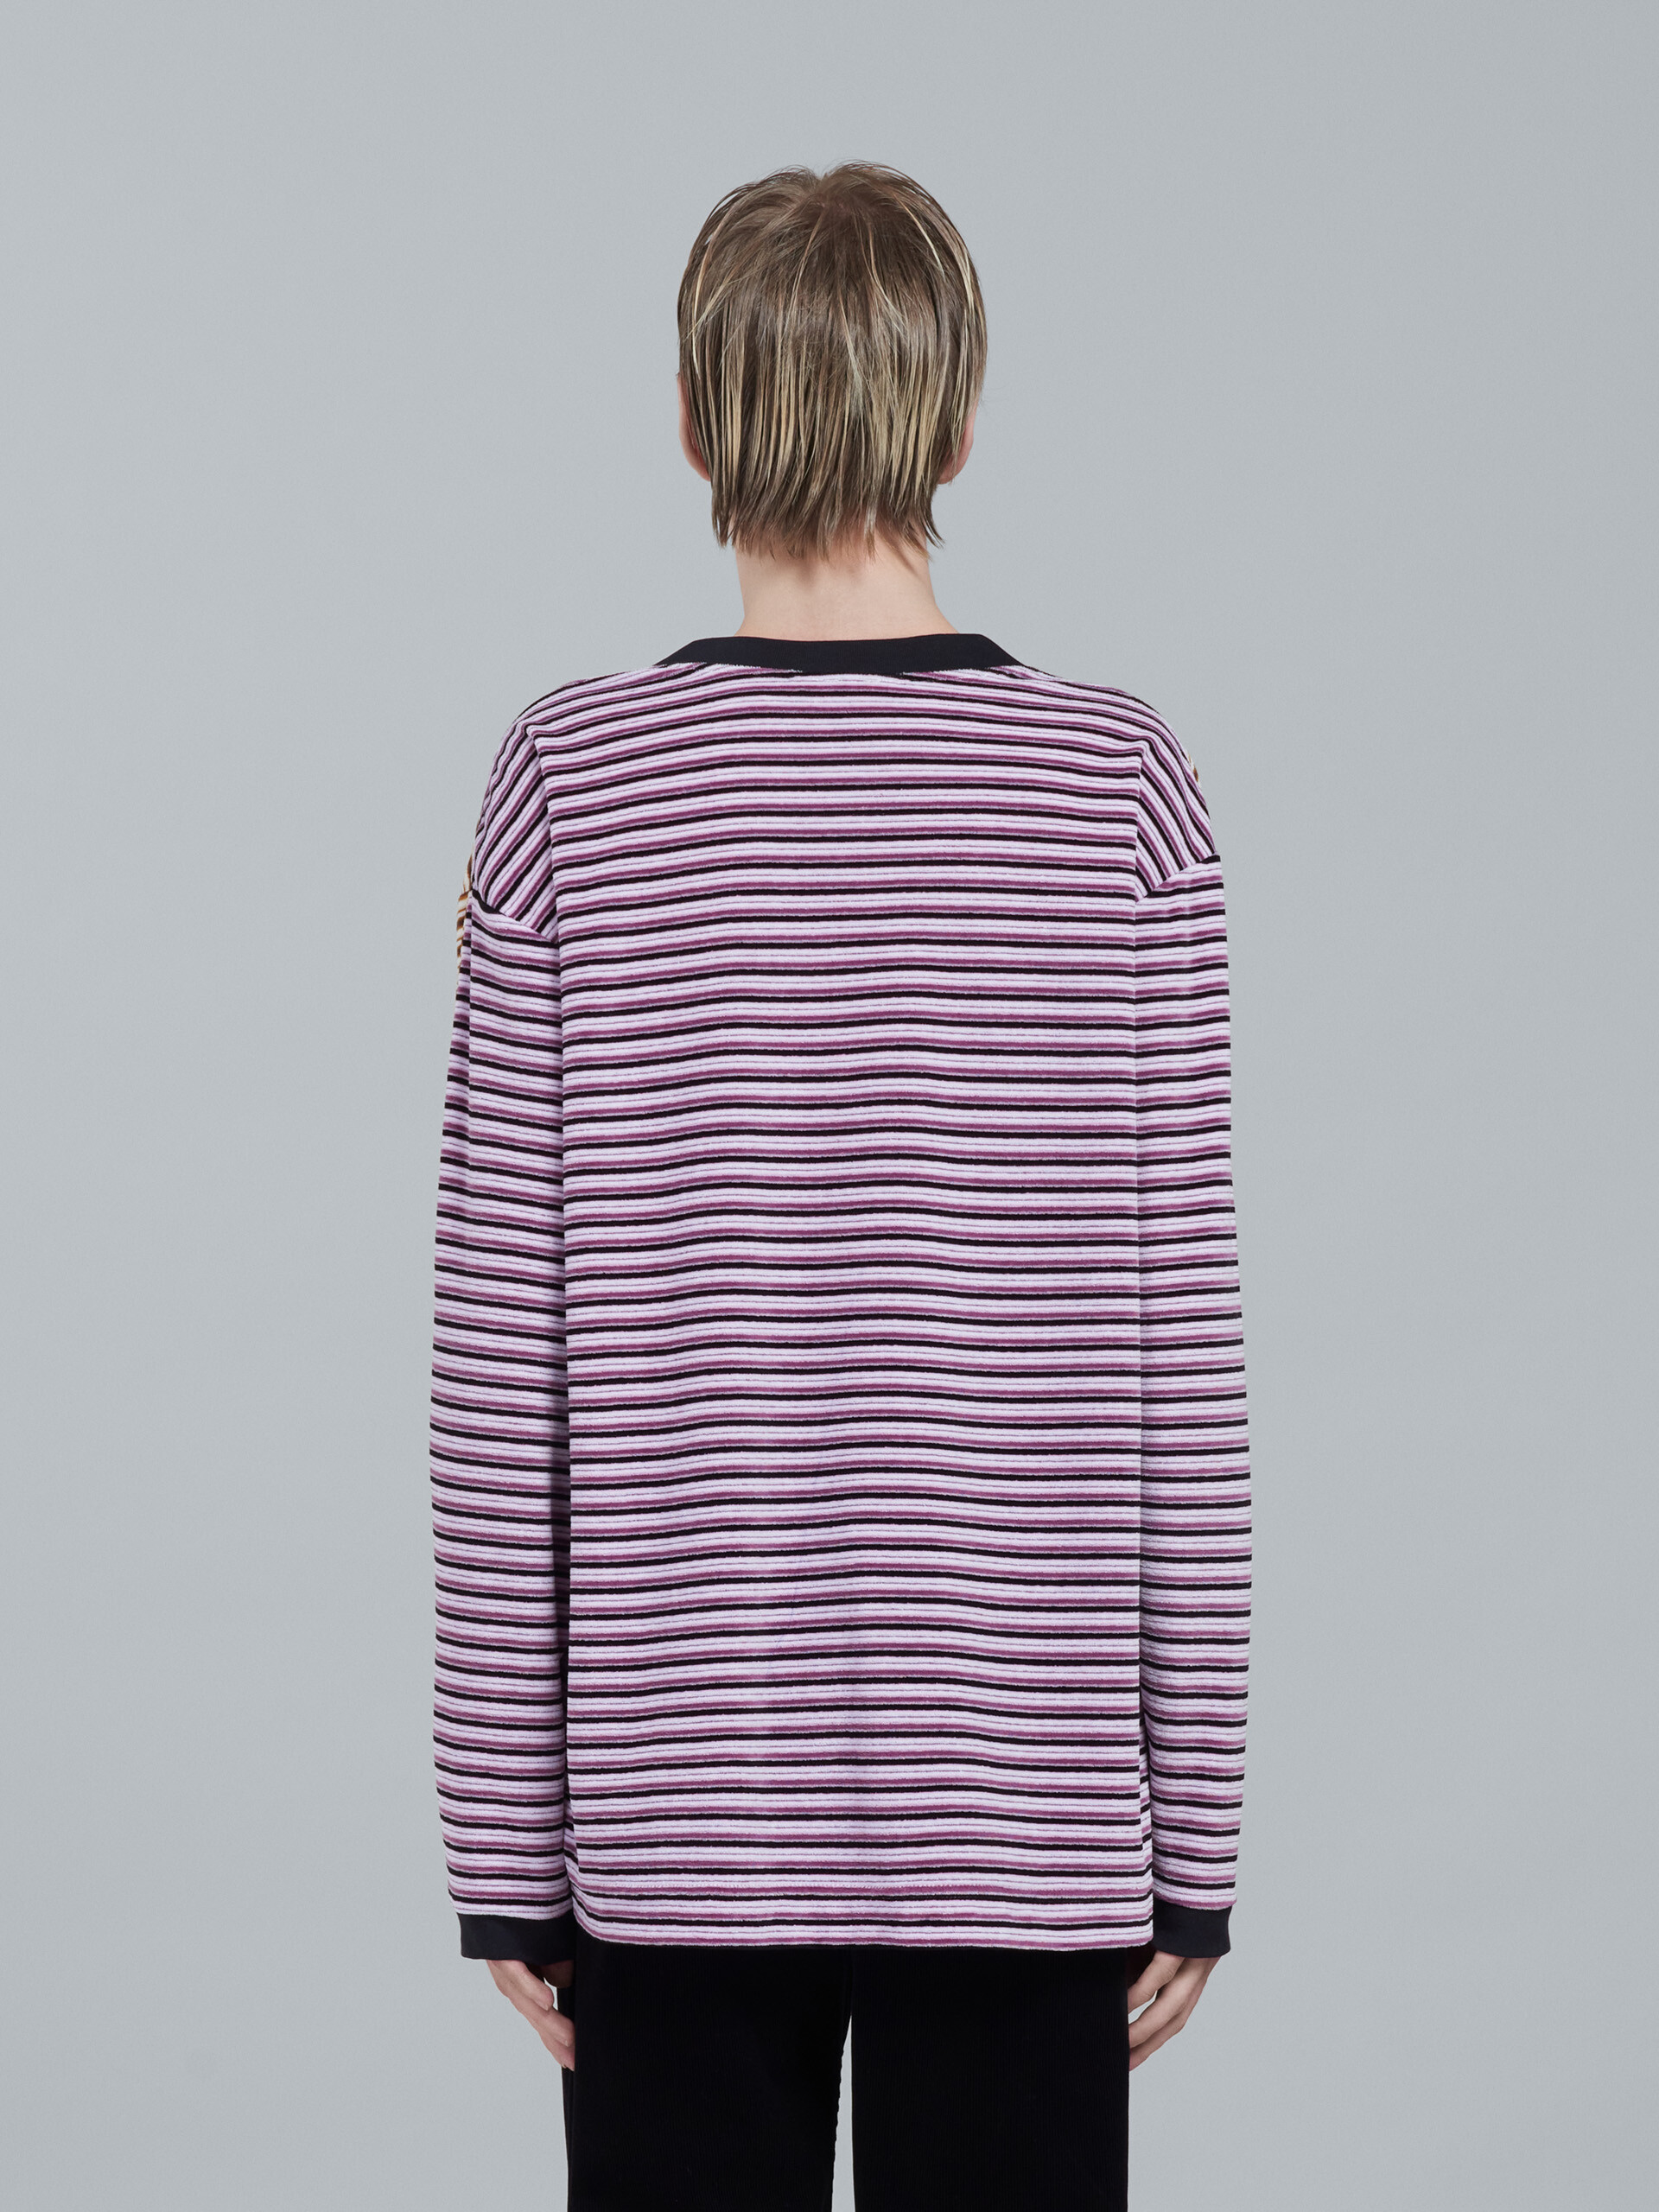 Striped velour long-sleeved T-shirt - T-shirts - Image 3